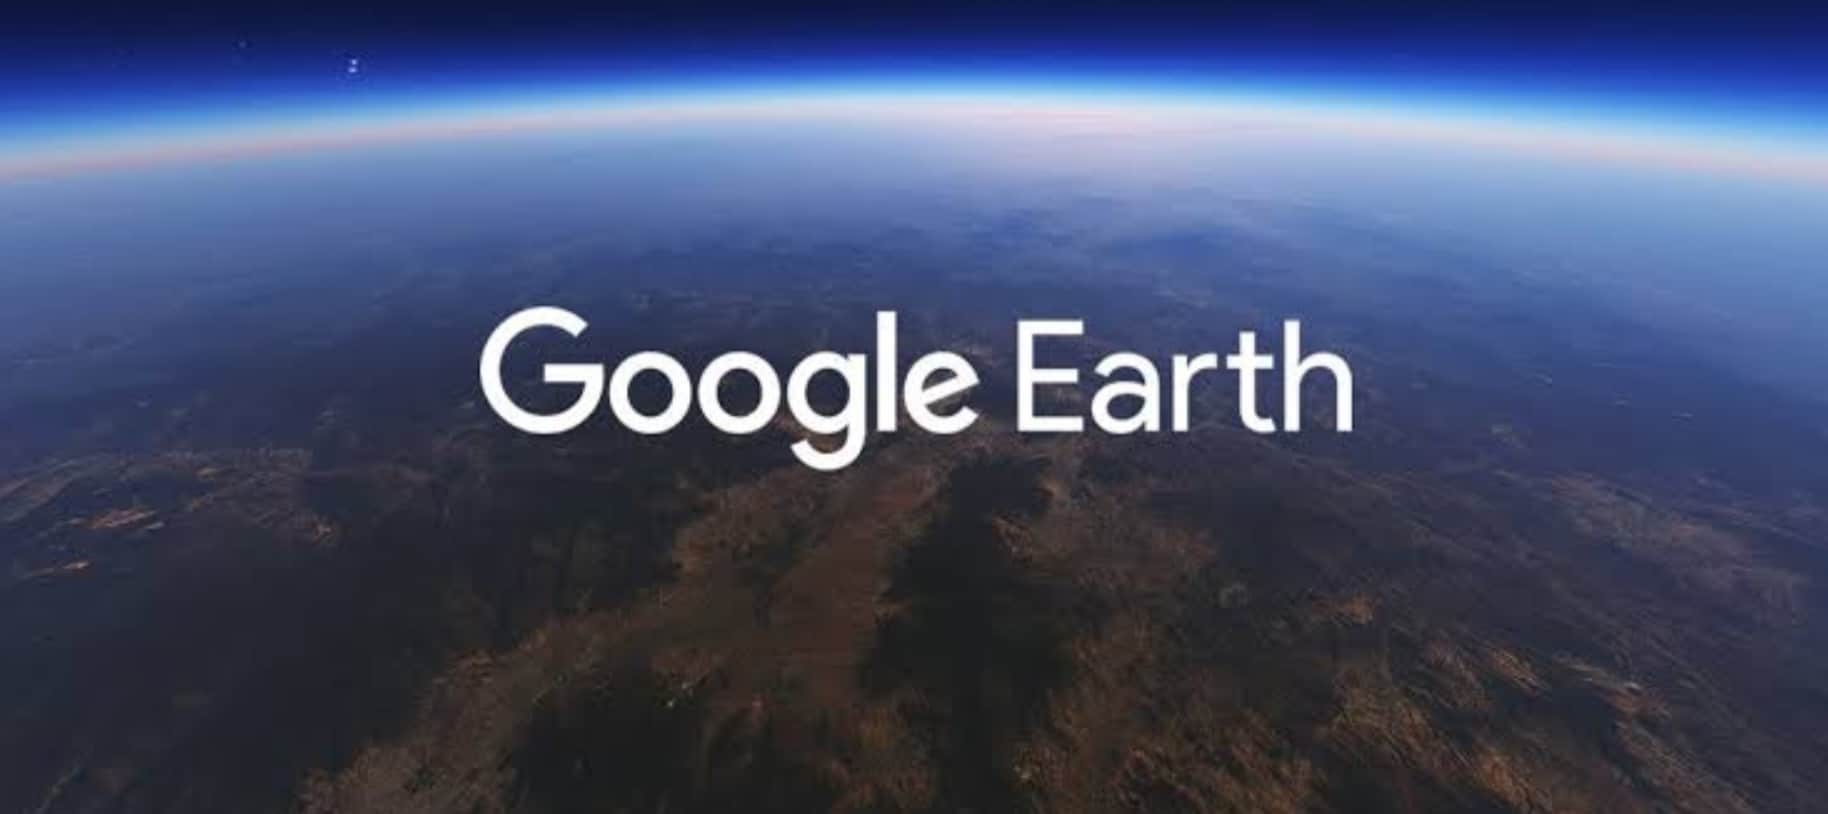 Google Earth for Android Allegedly Has a Hidden Time-traveling Time-lapse Mode